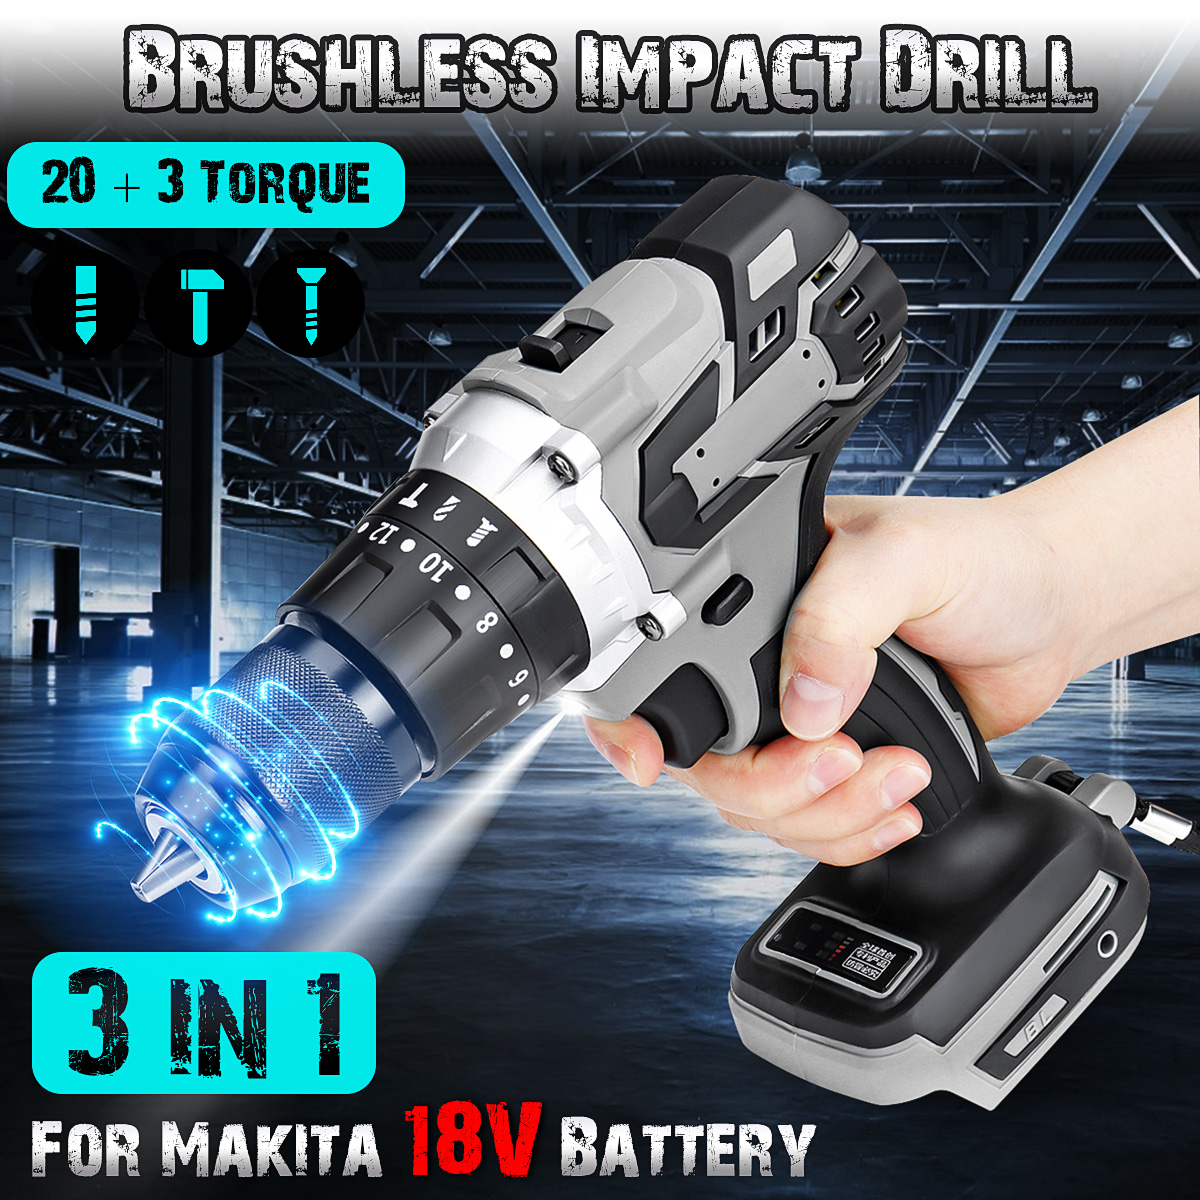 13mm-3-In-1-Brushless-Impact-Drill-Hammer-Cordless-Elctric-Hammer-Drill-Adapted-To-18V-Makita-Batter-1715080-2